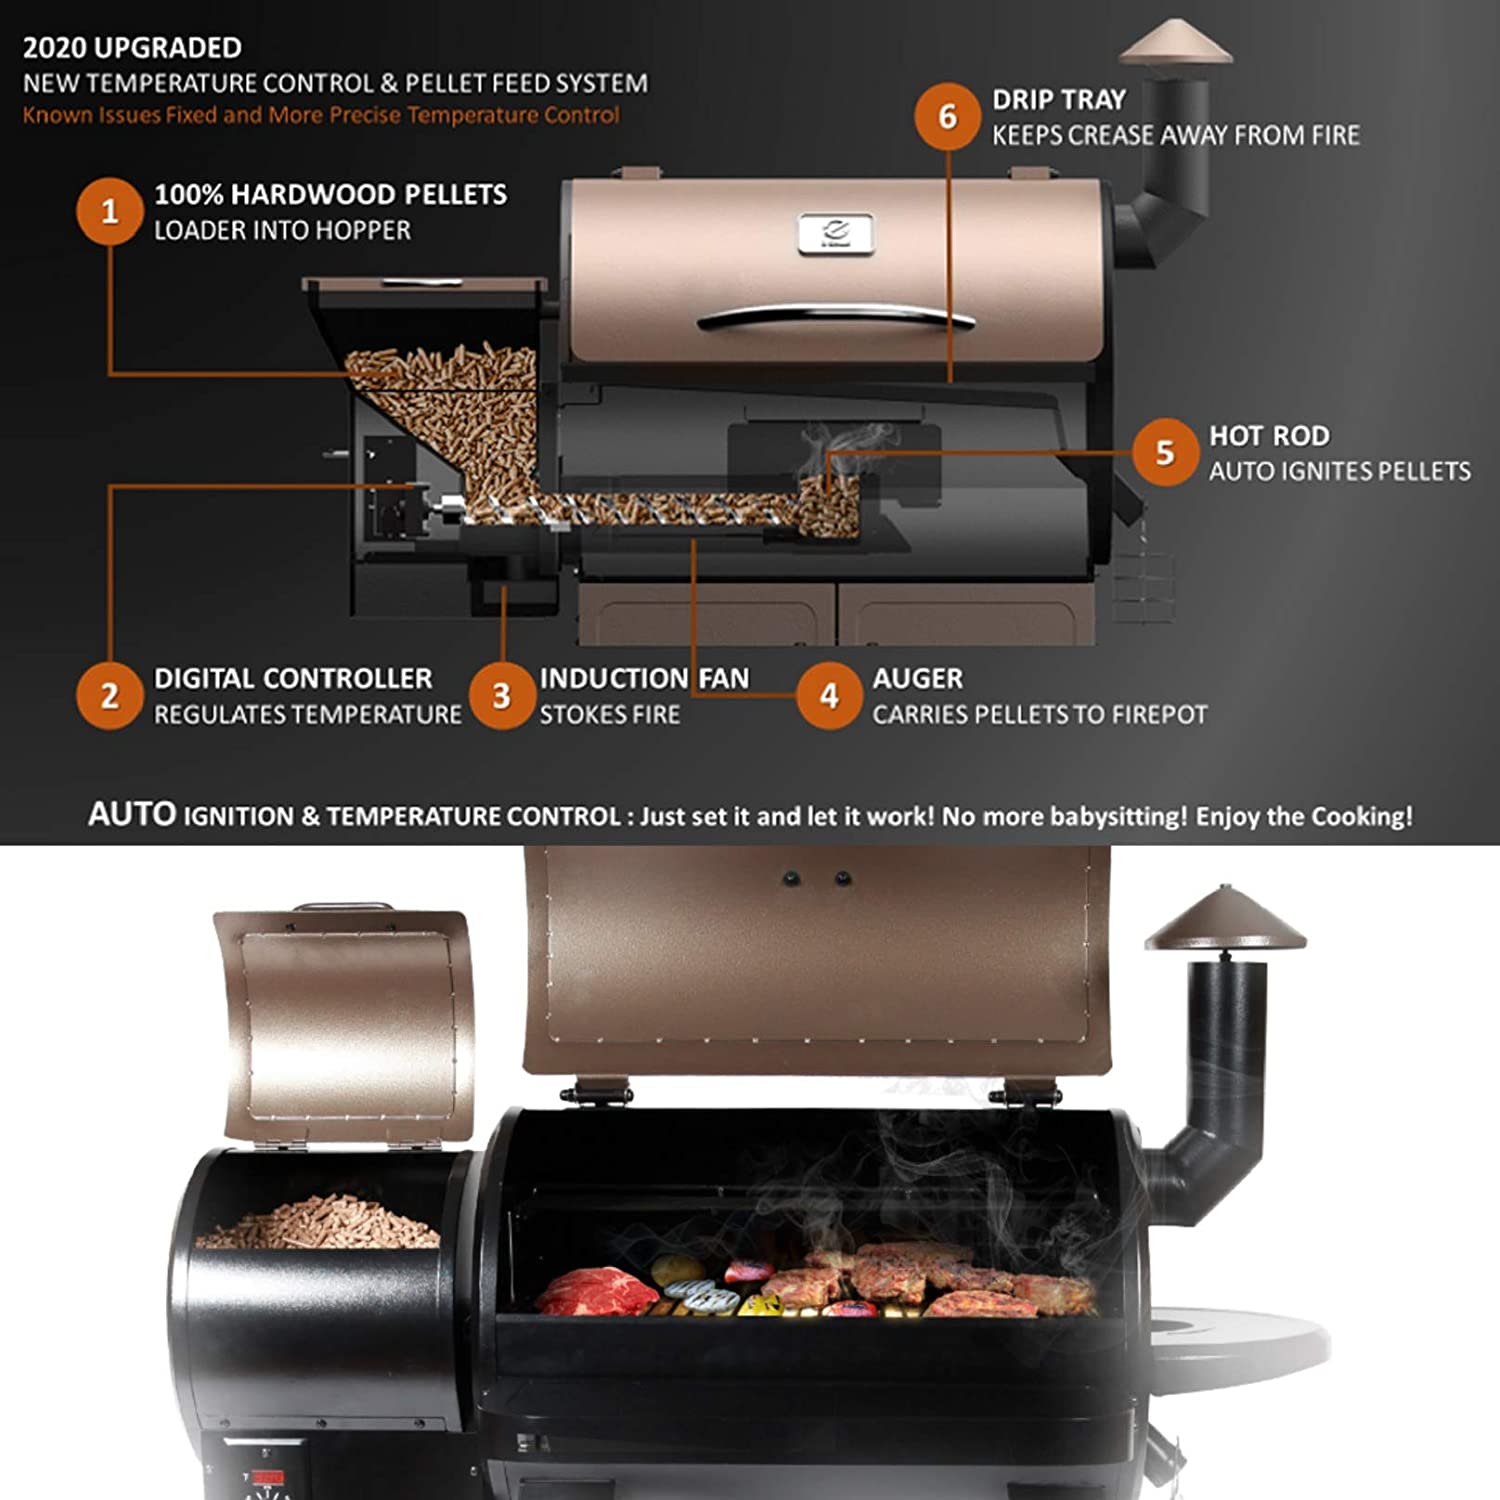 Z GRILLS 450 sq in Wood Pellet Barbecue Grill and Smoker Family Size Outdoor Cooking 8 in 1 Smart BBQ Grill - image 4 of 9